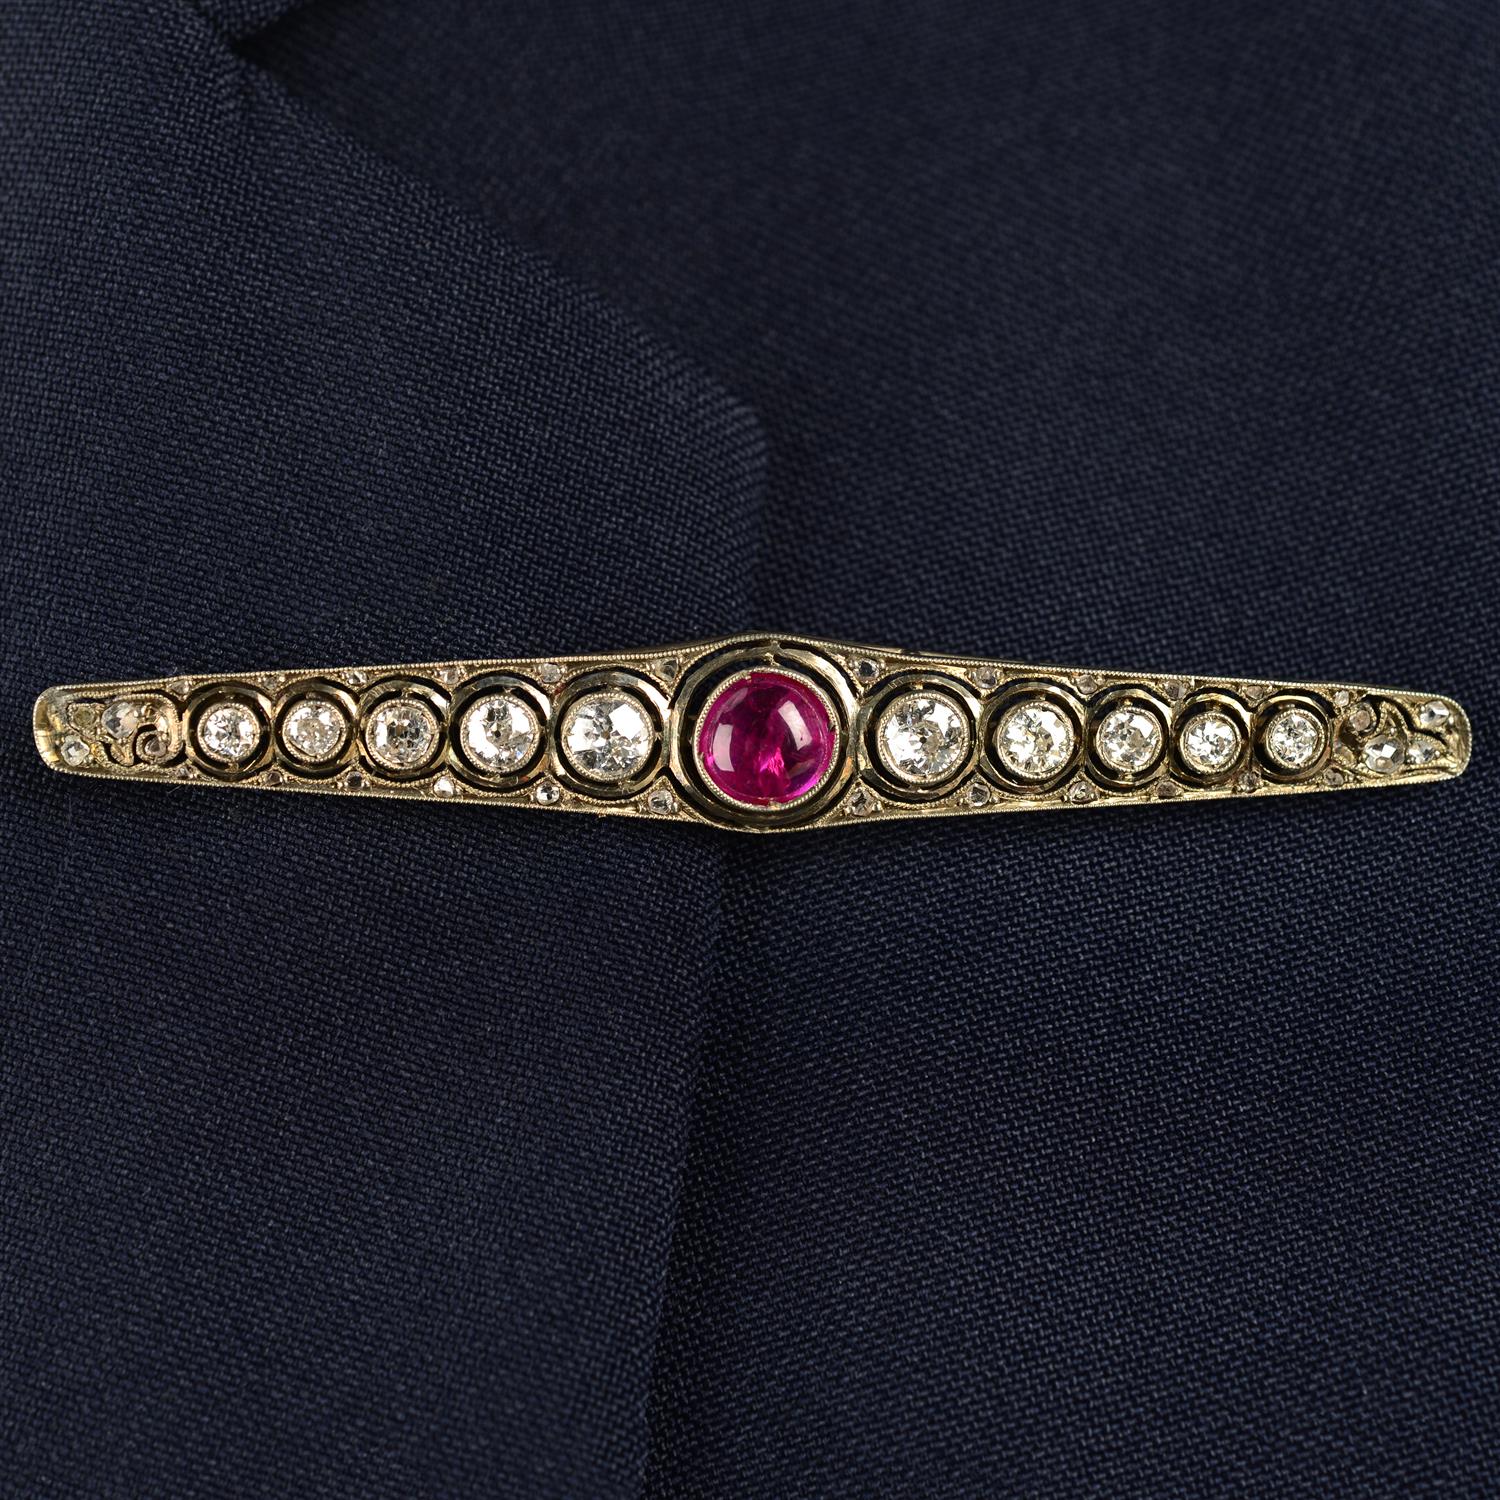 A mid 20th century silver and gold, ruby cabochon and circular-cut diamond brooch.